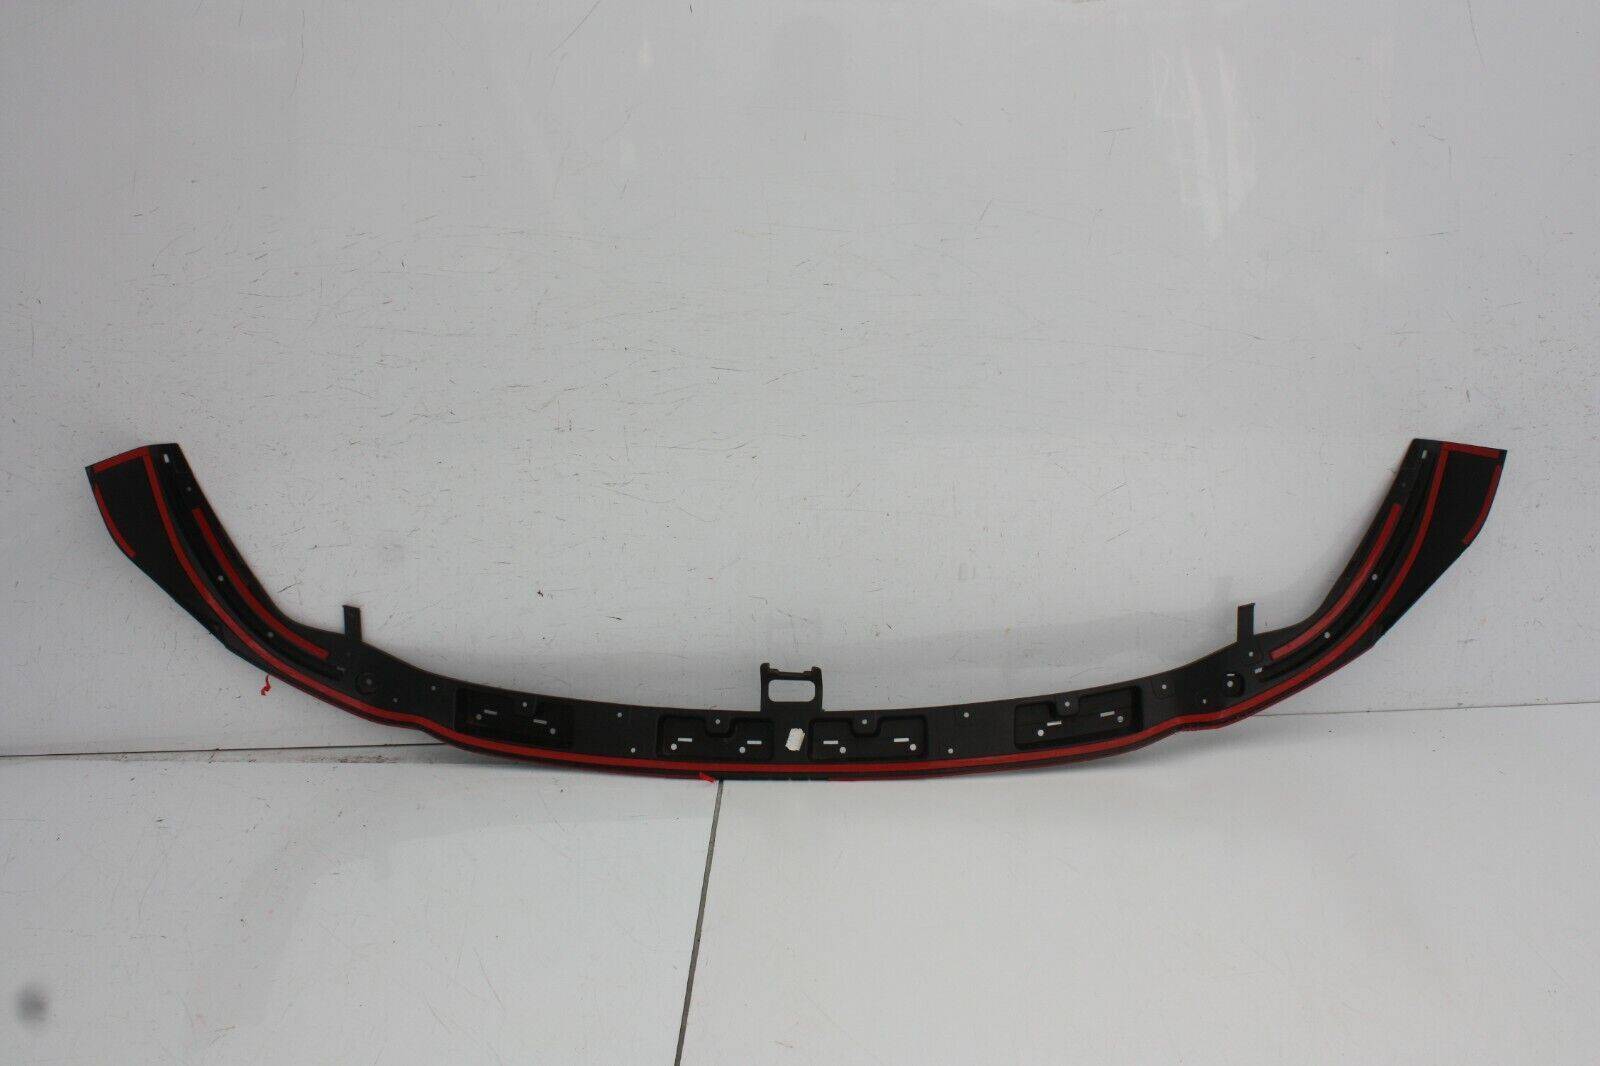 BMW 1 Series F40 Front Bumper Lower Section 51112468536 Genuine 175901800187